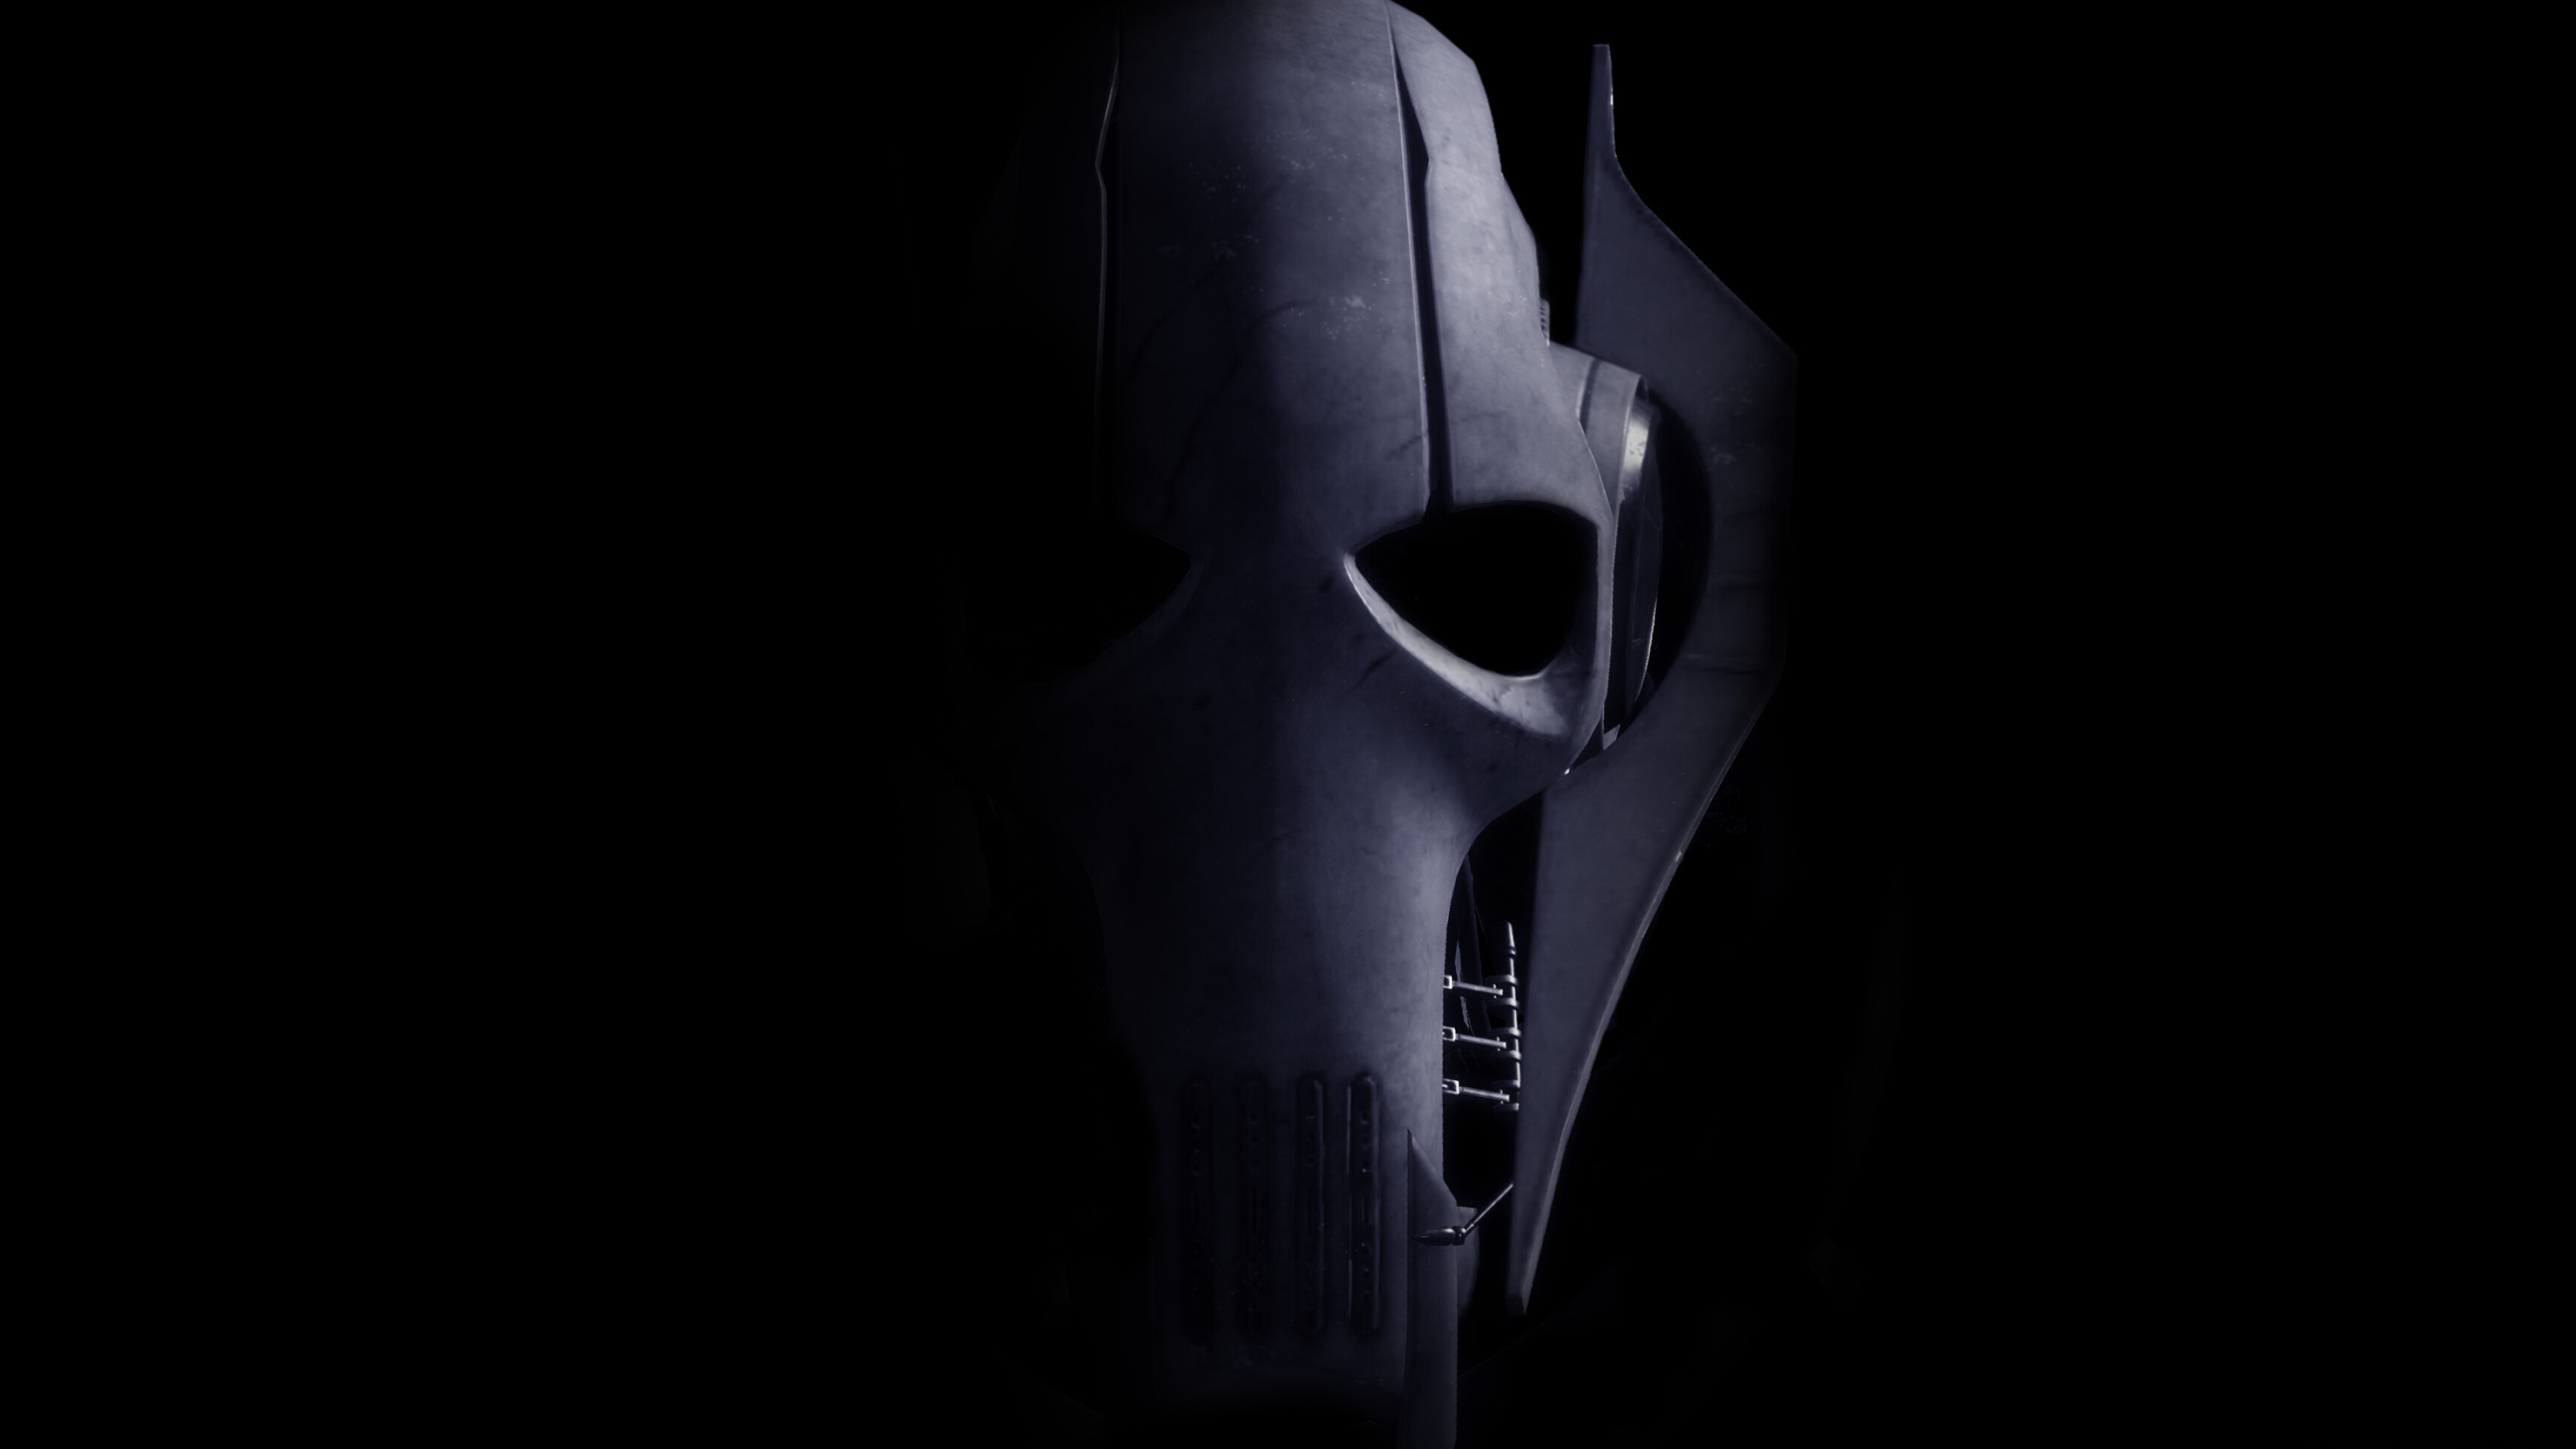 General Grievous: The face of death, A character and antagonist, The Star Wars franchise created by George Lucas. 3840x2160 4K Wallpaper.